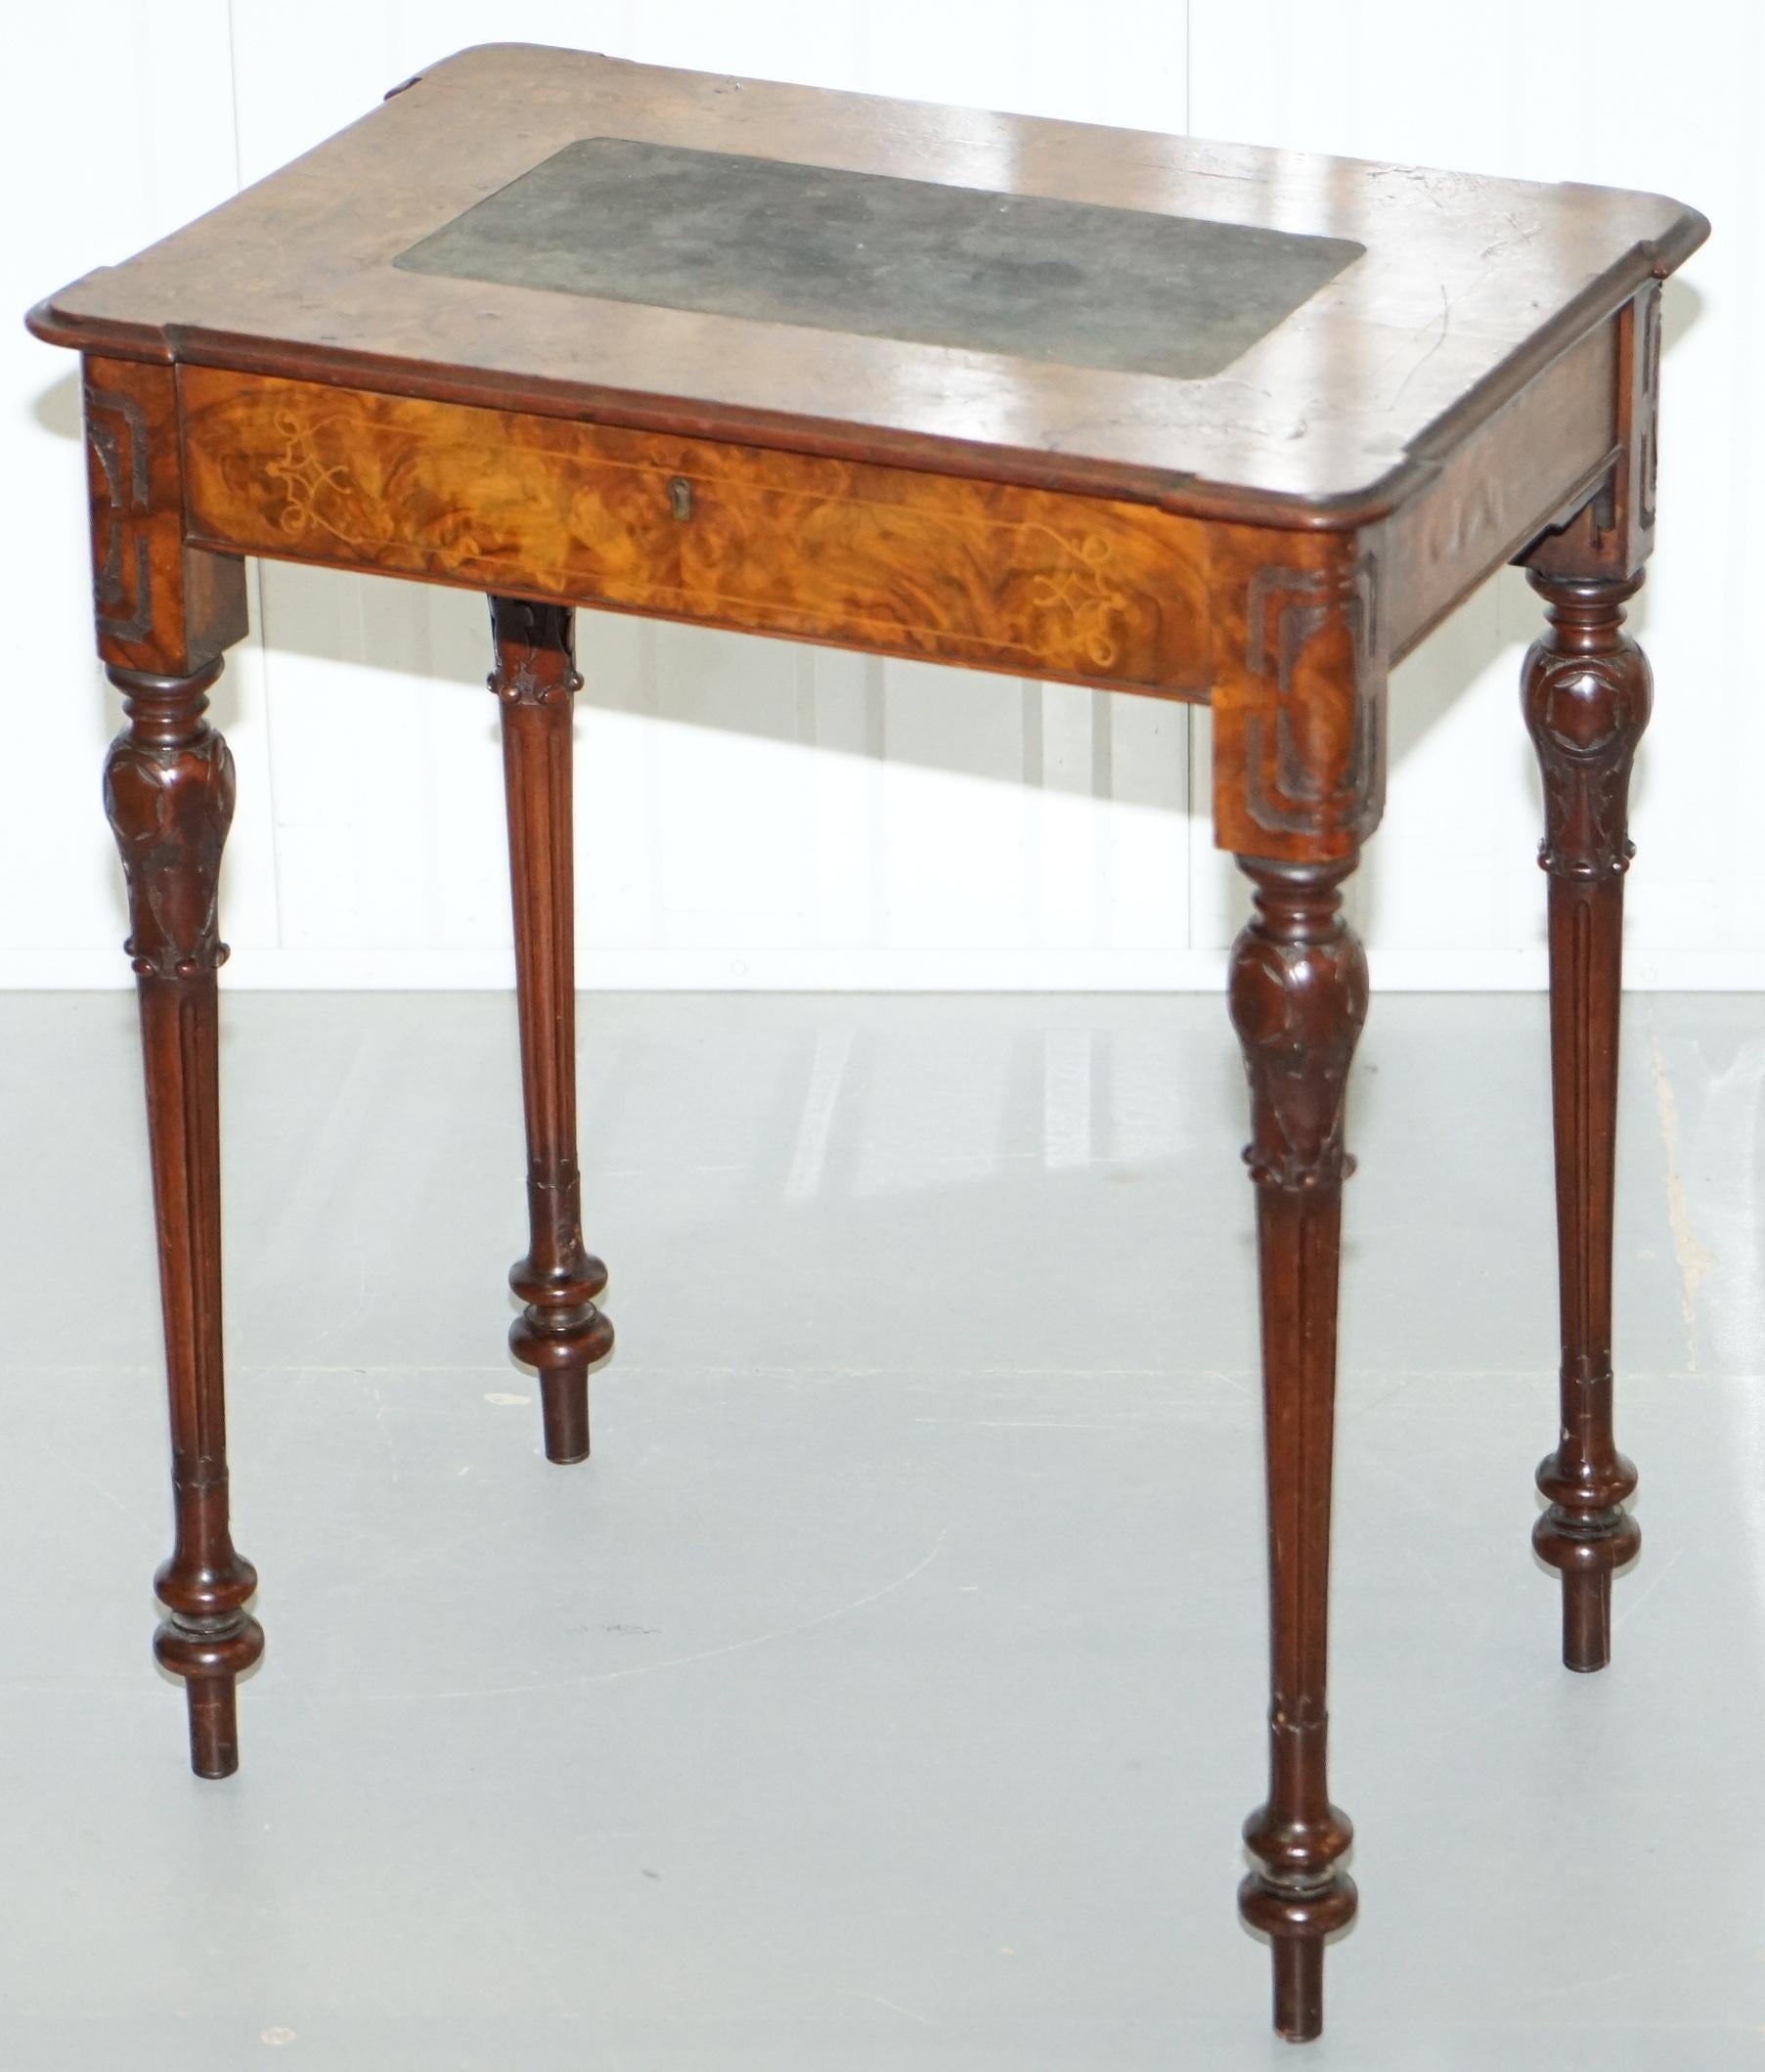 We are delighted to offer for sale this very rare early Victorian Burr walnut games table with lift top and fretwork carved lids

A very decorative and well-made piece, the burr walnut veneer looks good enough to eat from every angle, if luscious